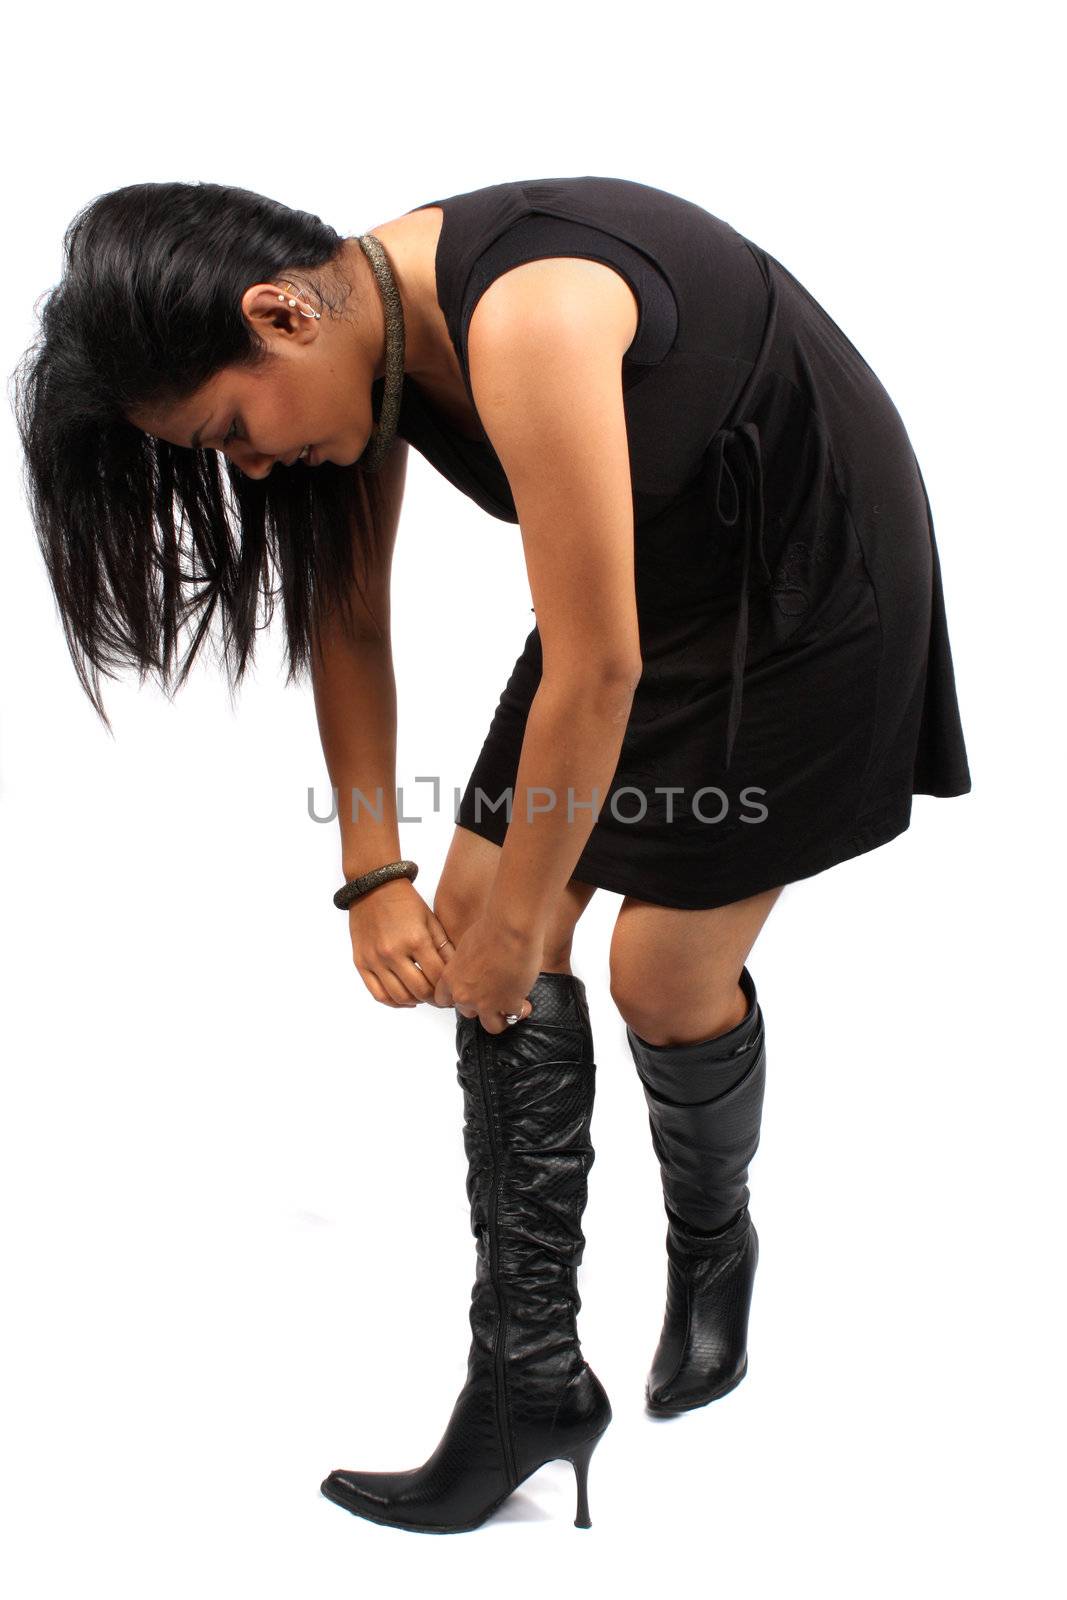 An Indian model wearing fashionable boots, on white studio background.